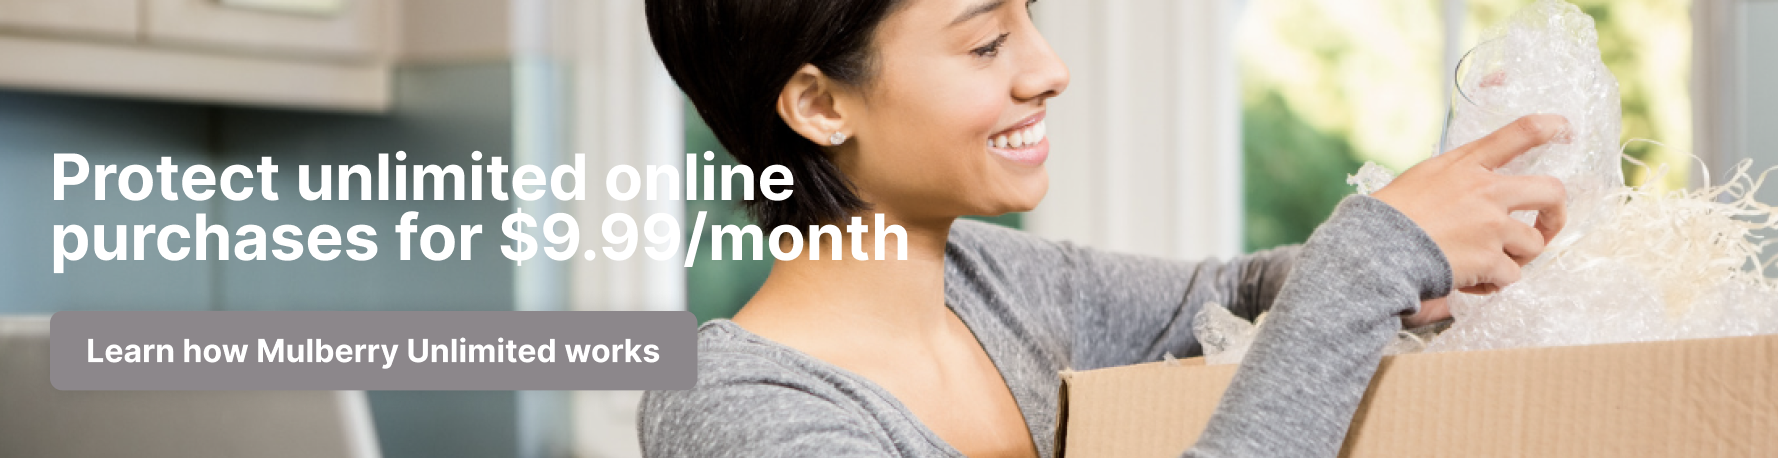 Protect unlimited online purchases for $9.99/month